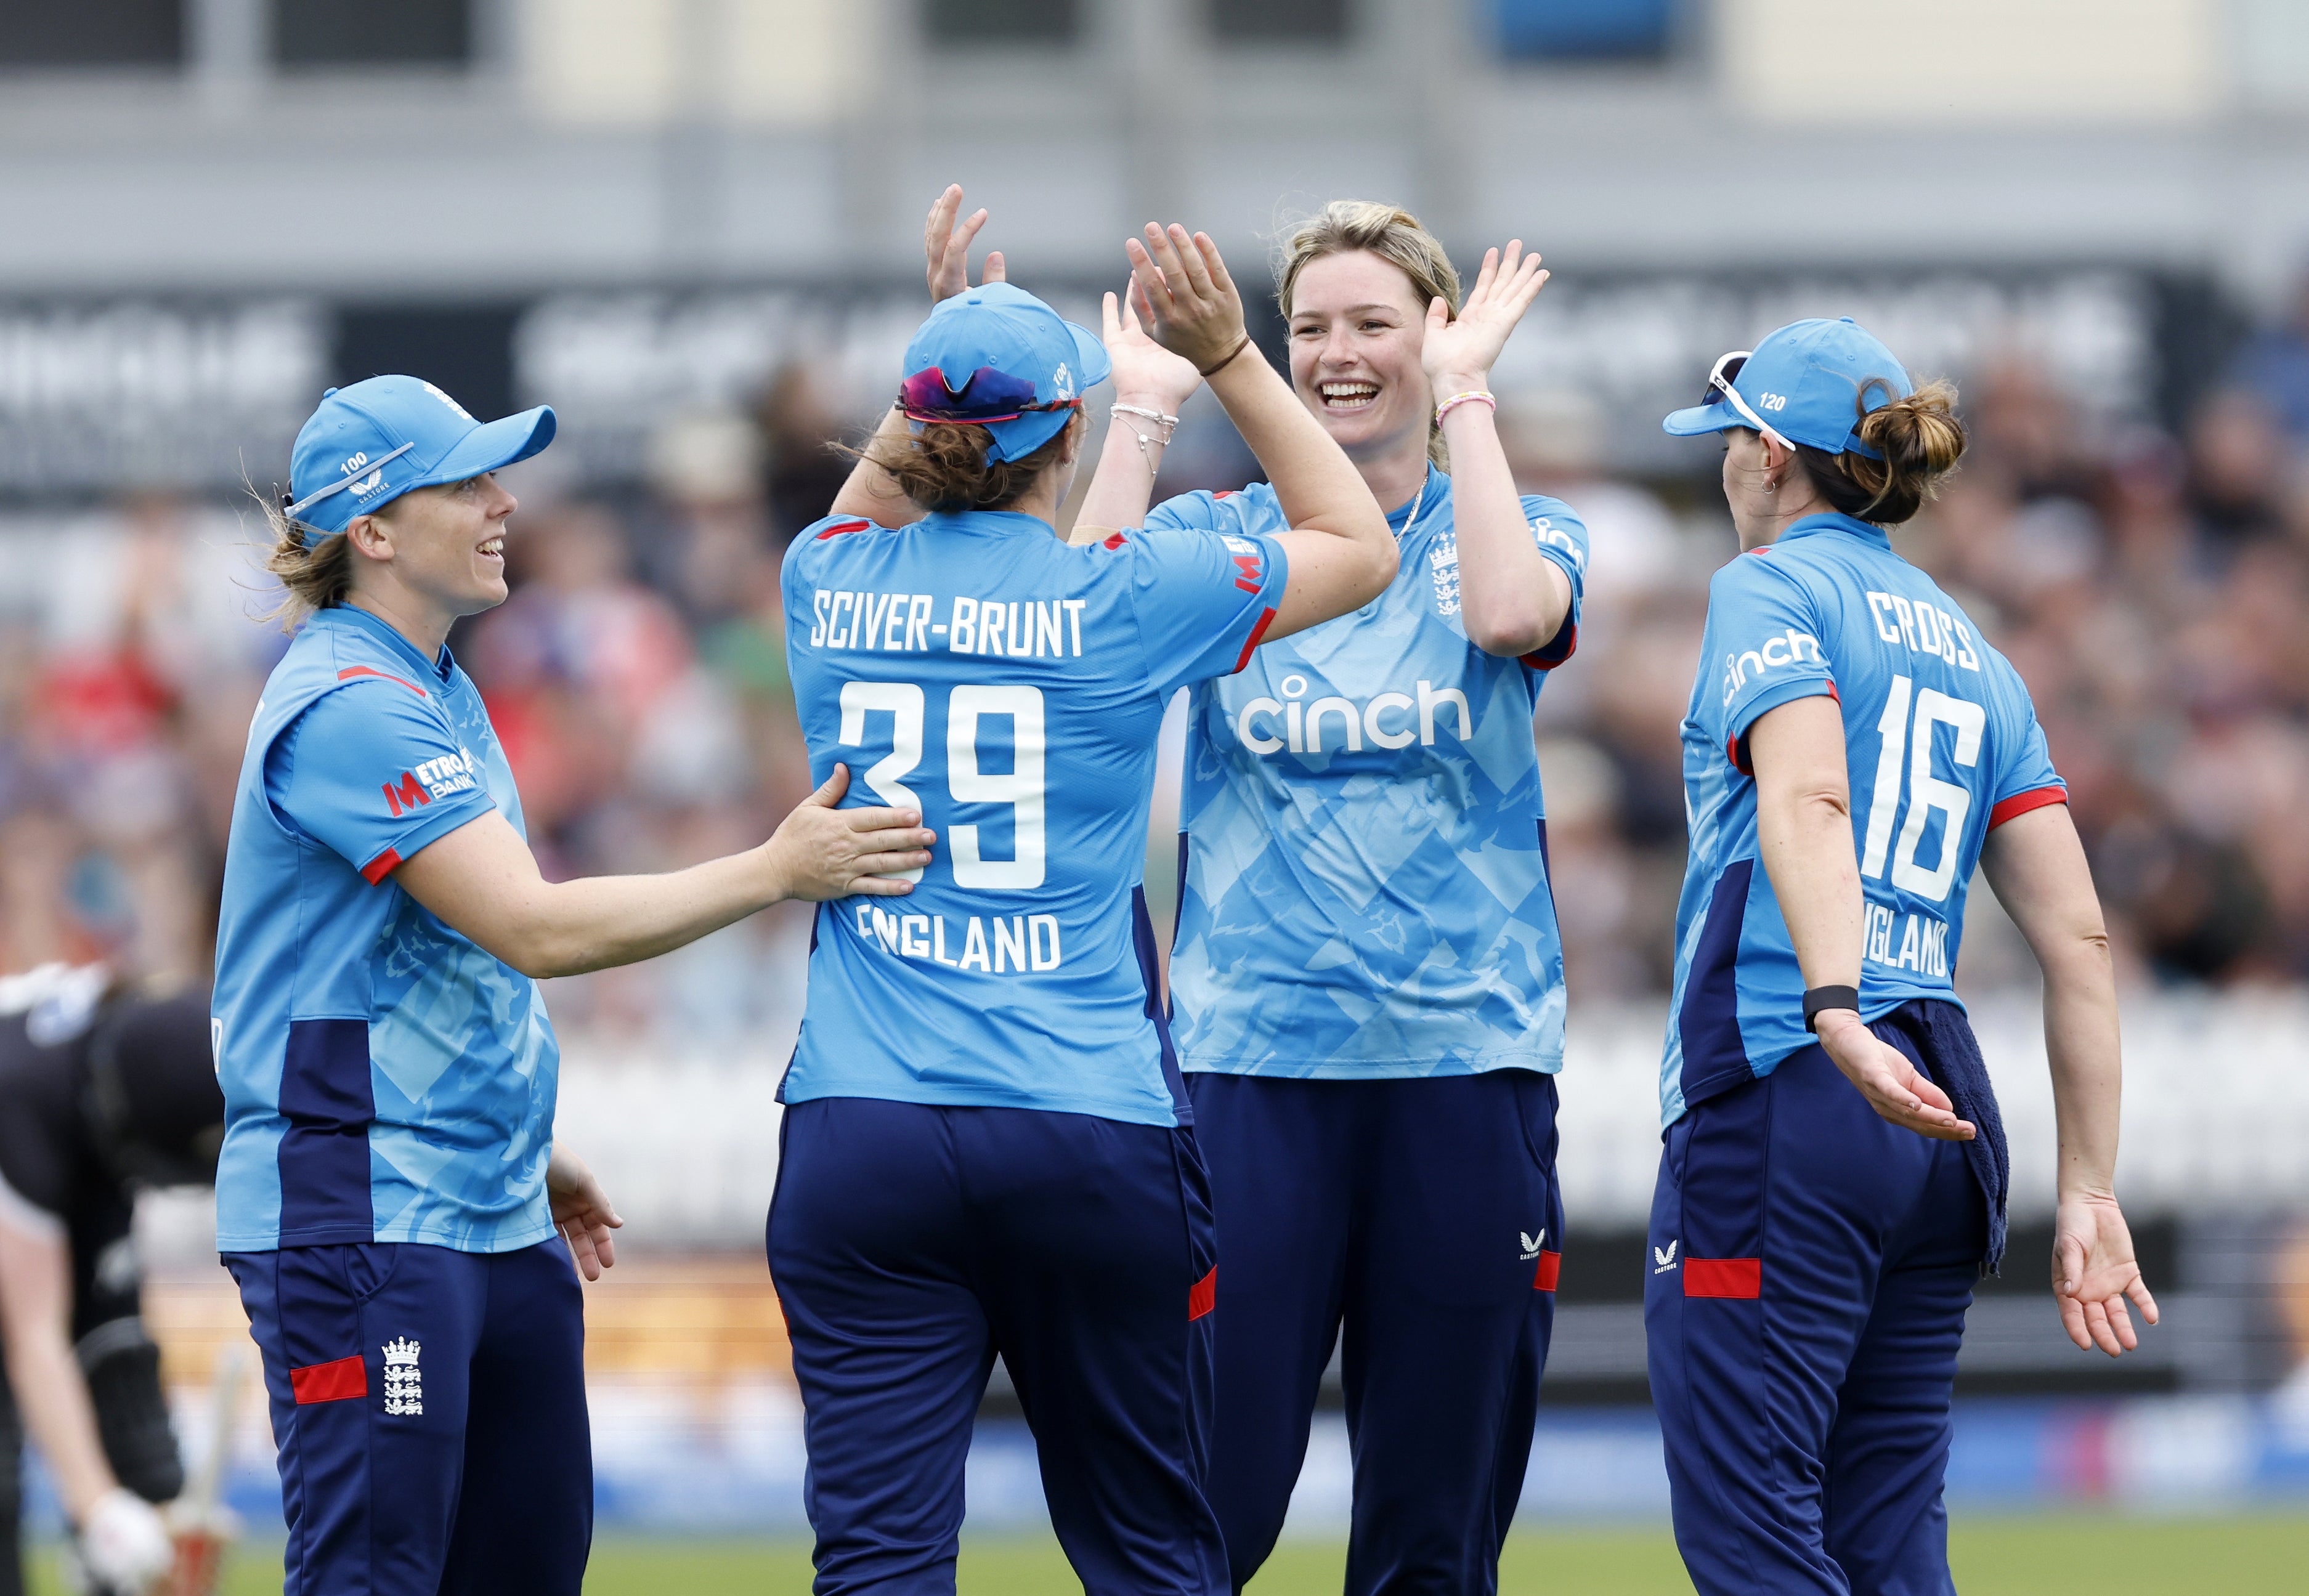 England’s Lauren Bell (centre right) celebrates taking the wicket of New Zealand’s Isabella Gaze (not pictured) at Bristol (Nigel French/PA)